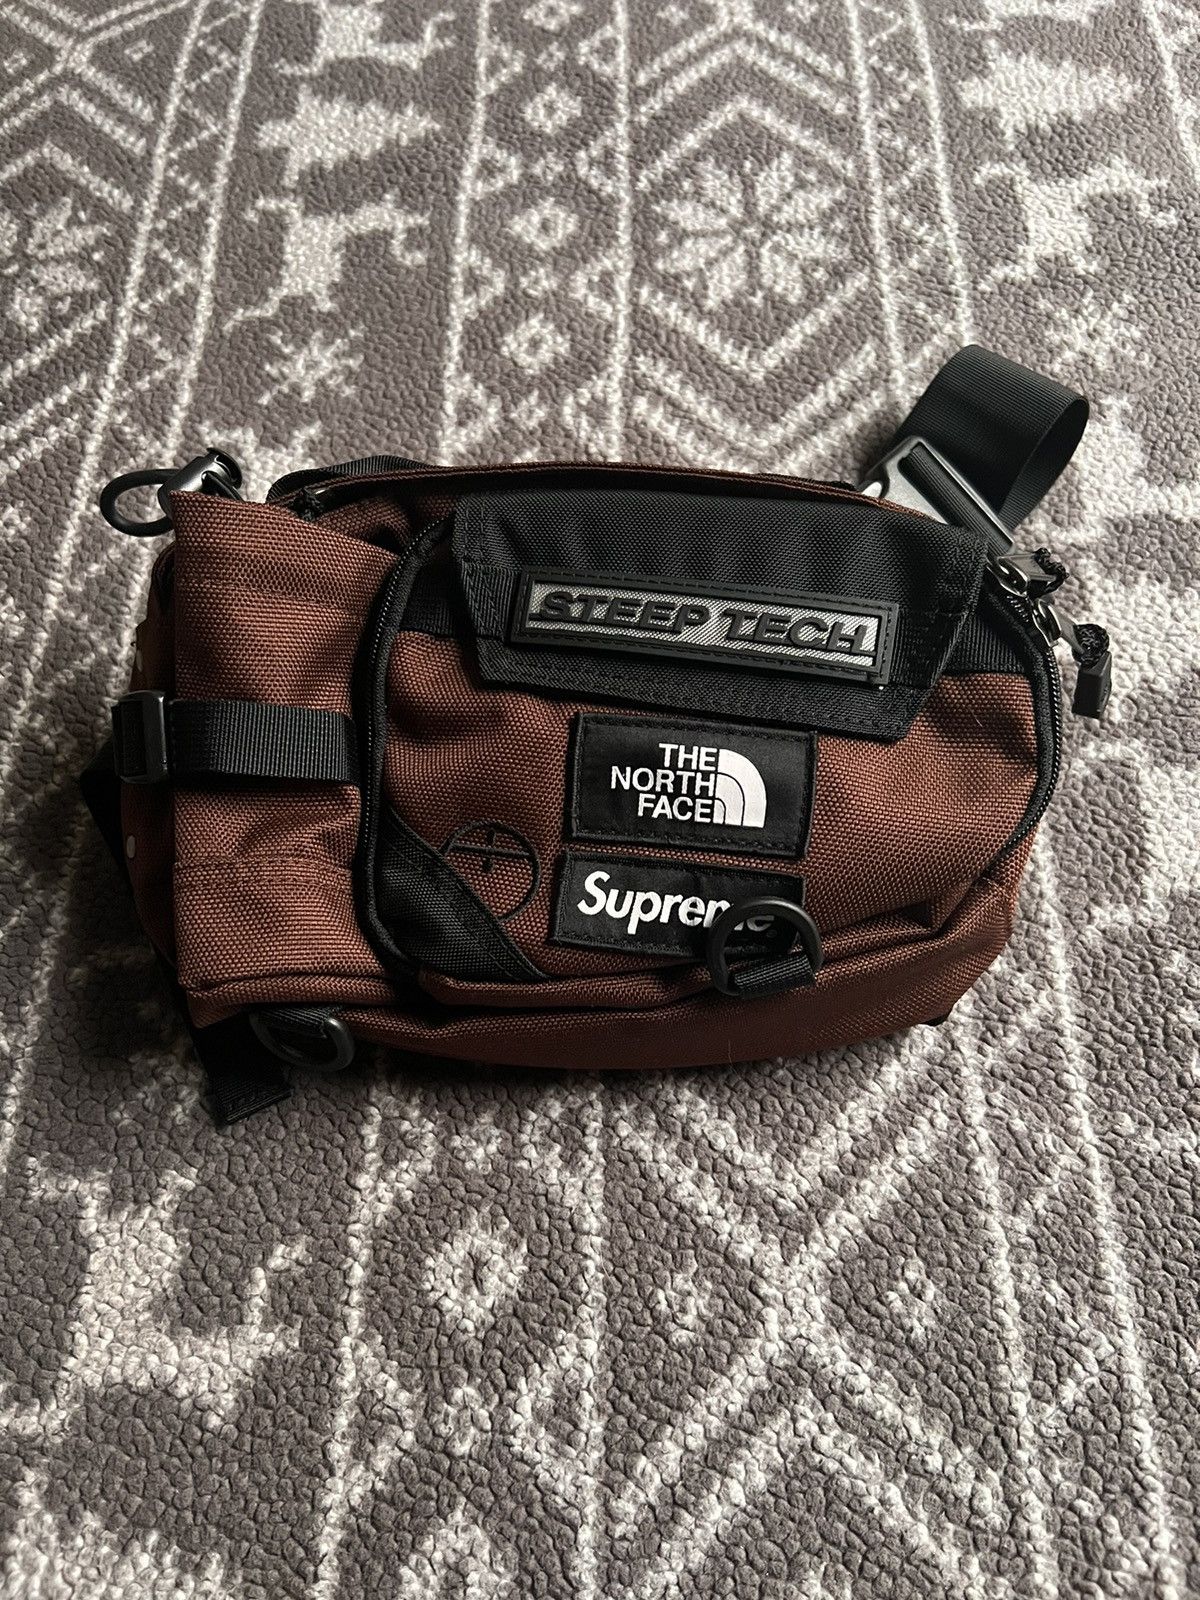 Supreme North Face x Supreme Sleep Tech fanny pack | Grailed